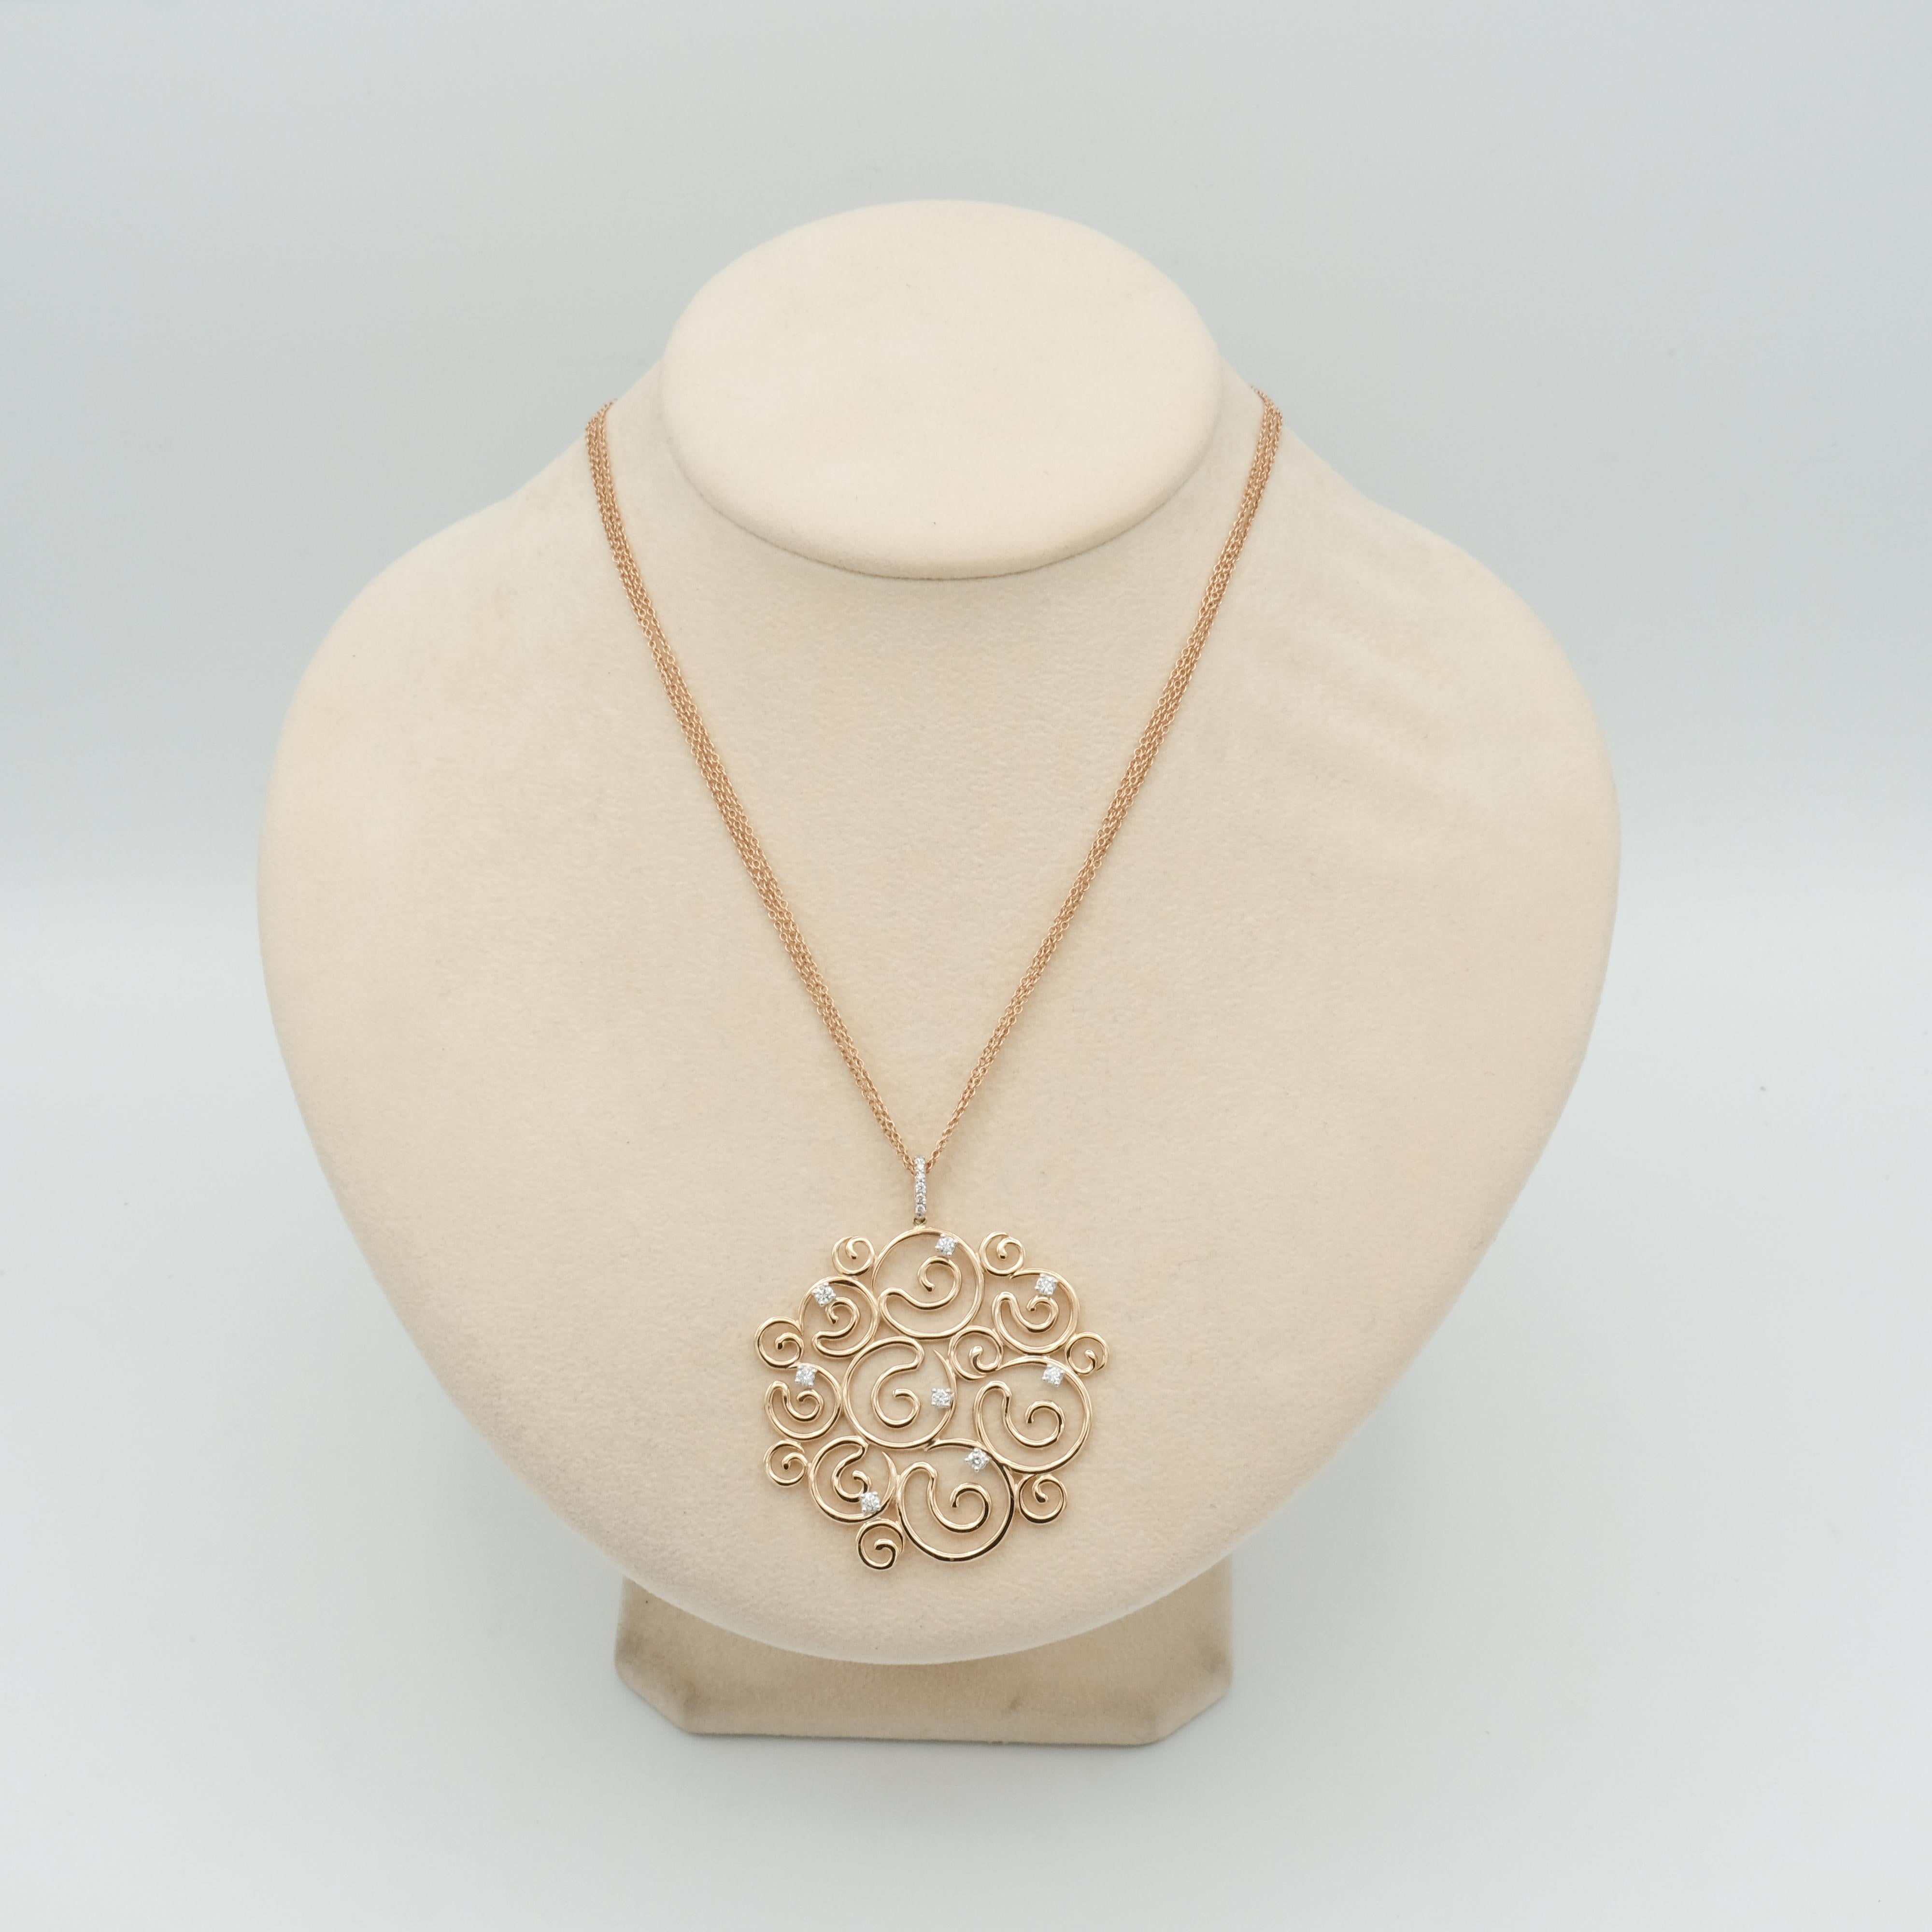 Pendant 18kt Pink Gold and Diamonds made in Italy with arabesque inspiration. diamonds 0,50.
weight 18 gr.
